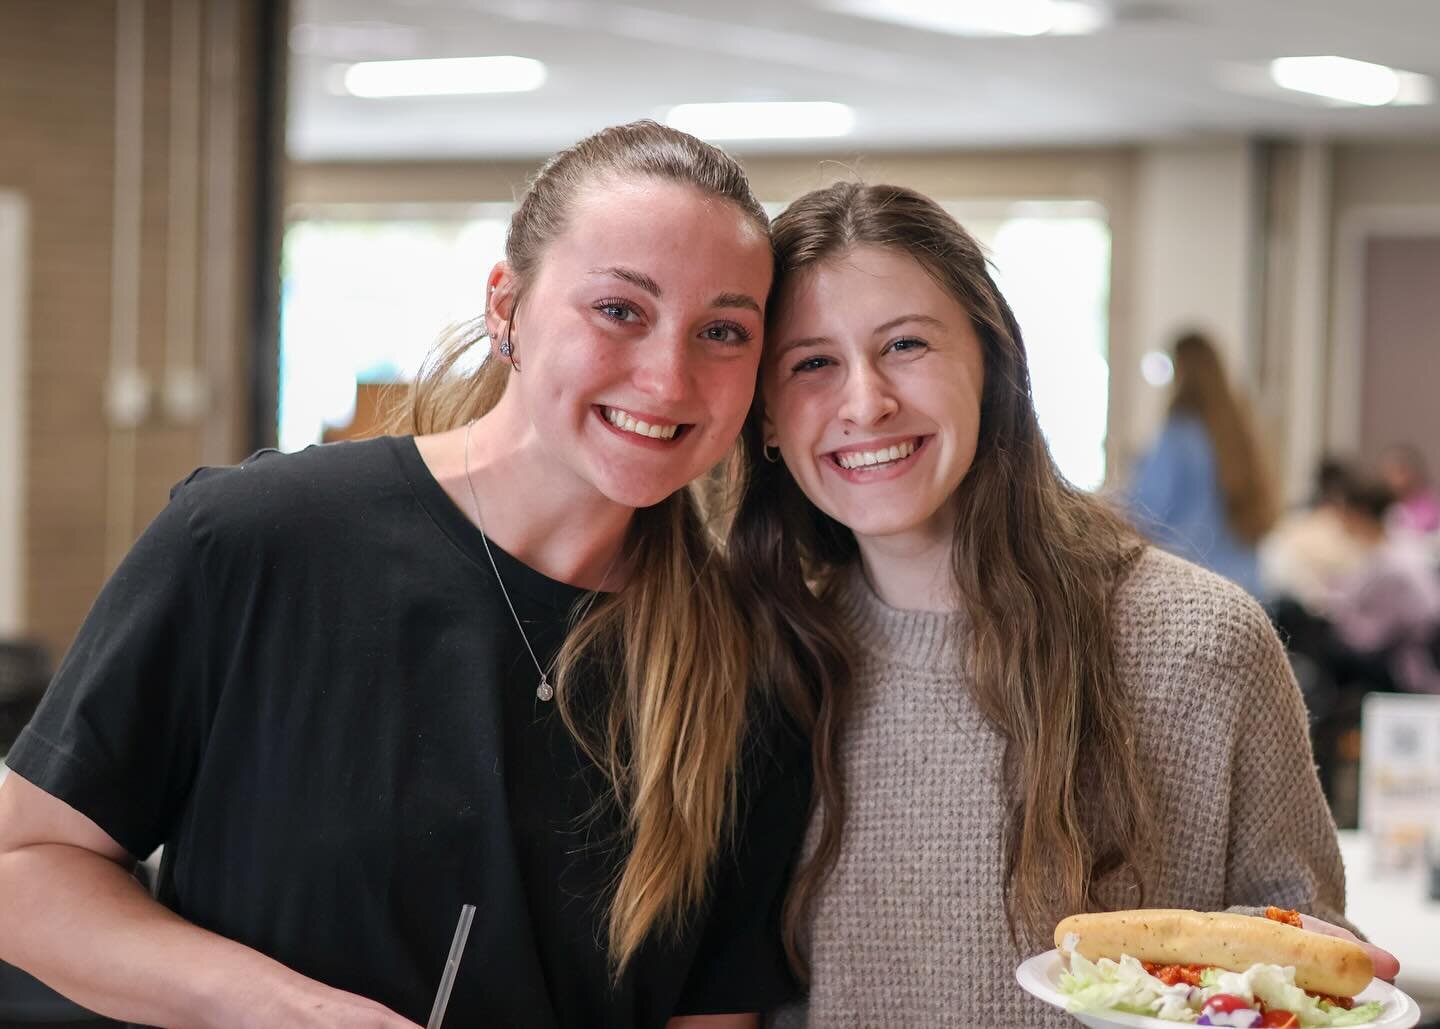 Yes there&rsquo;s a lot of breadsticks in these photos, No we&rsquo;re not having breadsticks today, BUT we are having one of your favs! 

Join us for lunch, a Bible message, and good conversations before you head out for Spring Break!